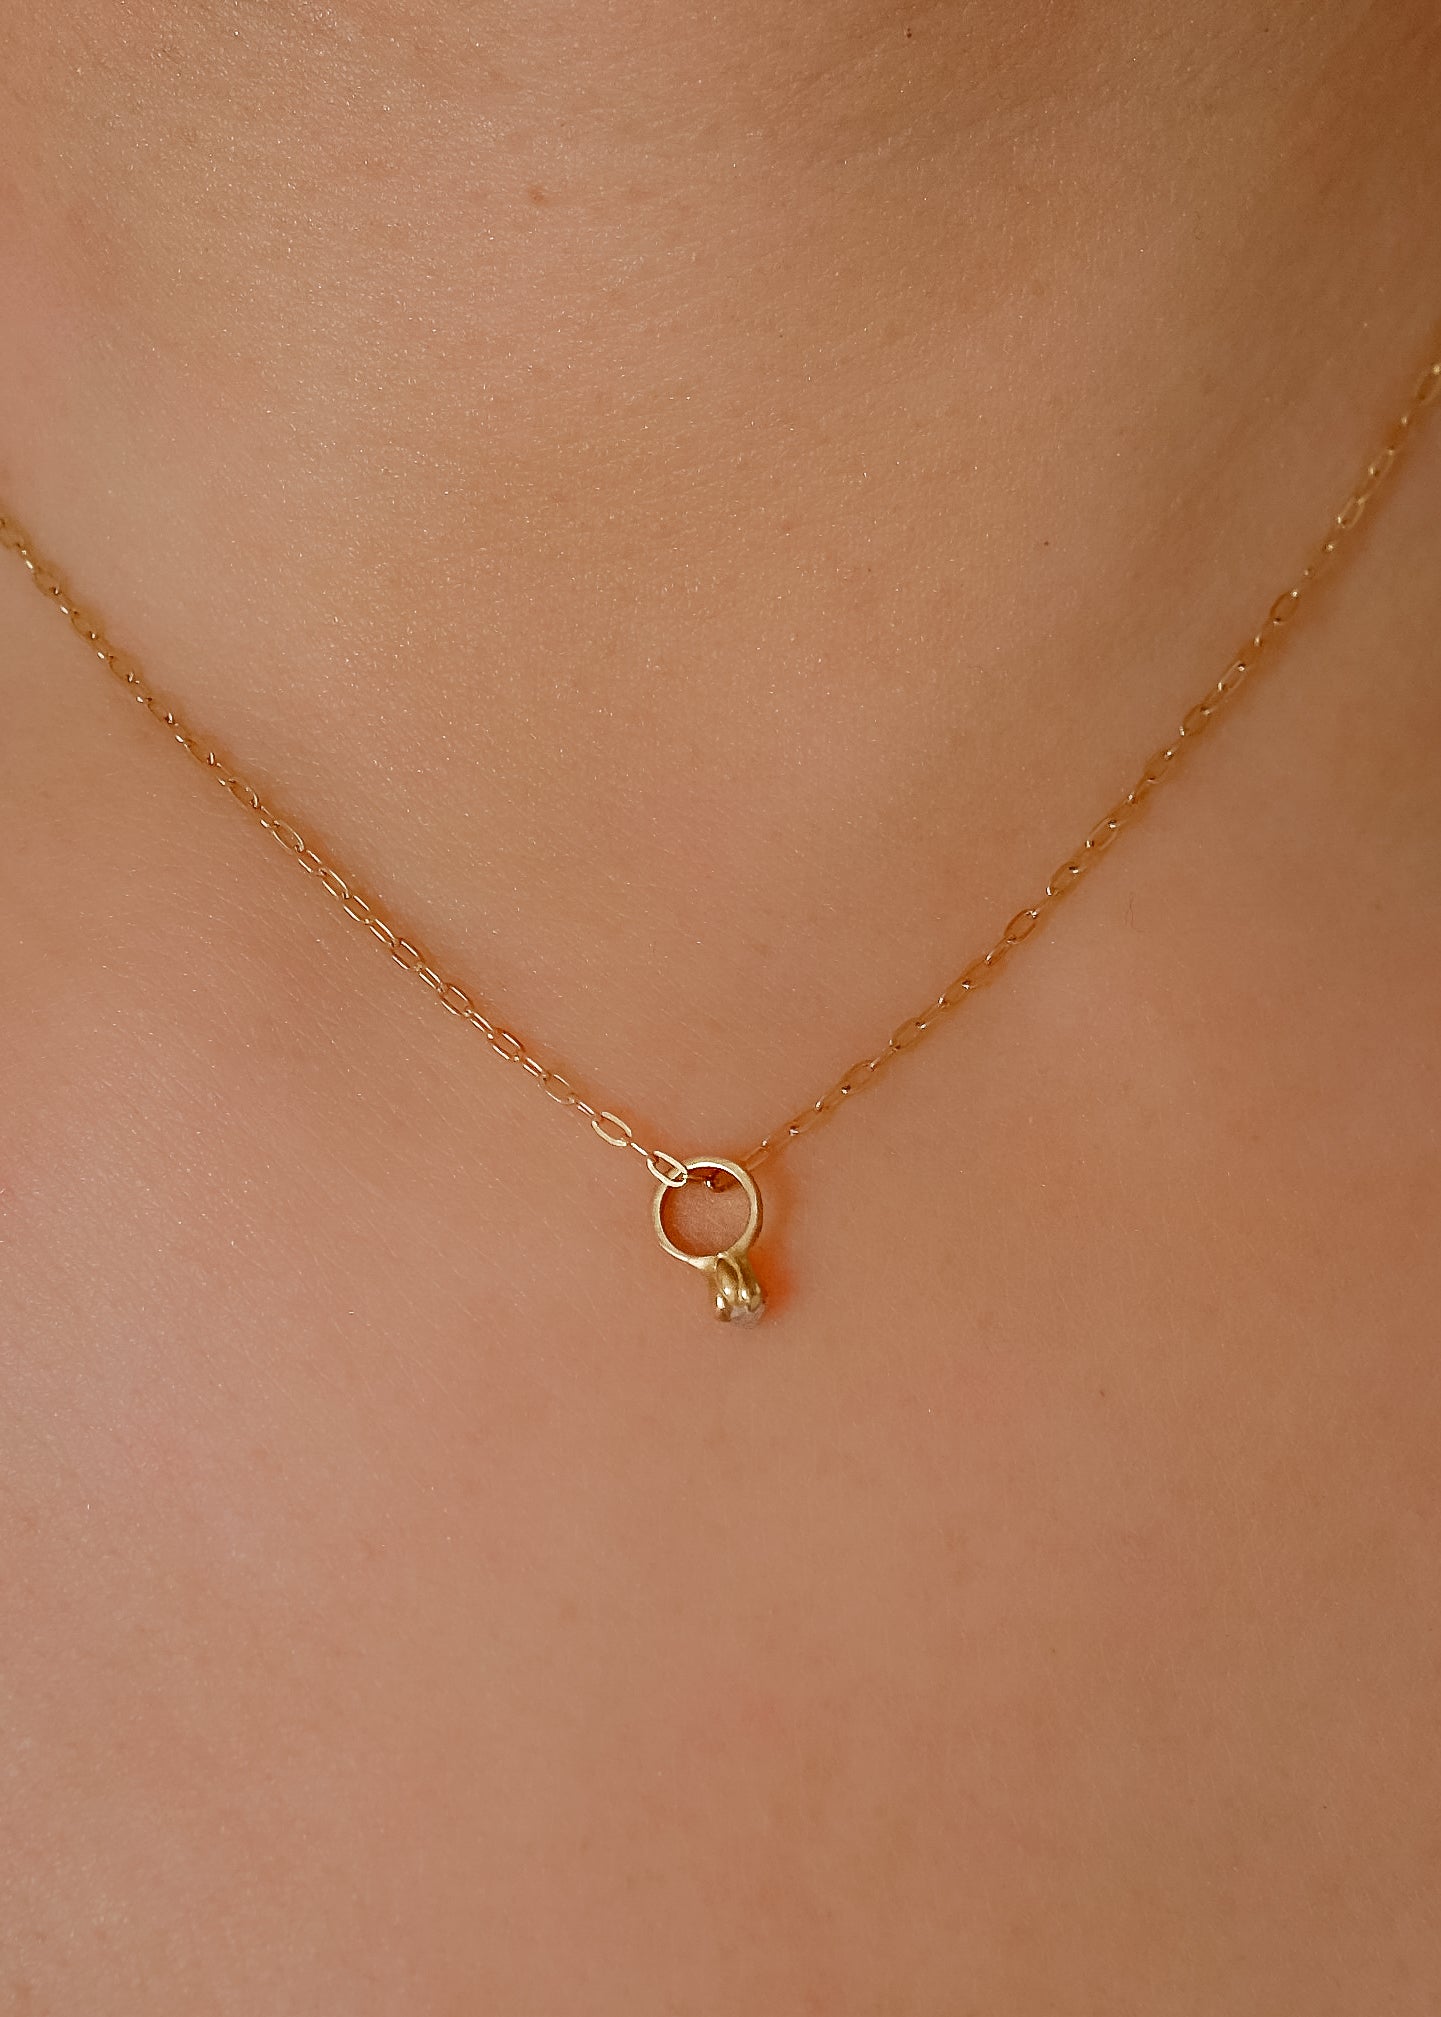 Inspired by a set of rings purchased for a childhood crush, the Bitty Diamond Ring necklace features a delicate gold ring-shaped pendant, hand-crafted with intricate detail to reveal a stunning diamond crown. Perfect for celebrating new motherhood, sisterhood, friendship or love in bloom, the Bitty captures the magic of innocent childhood days, infused now with refined sophistication. 